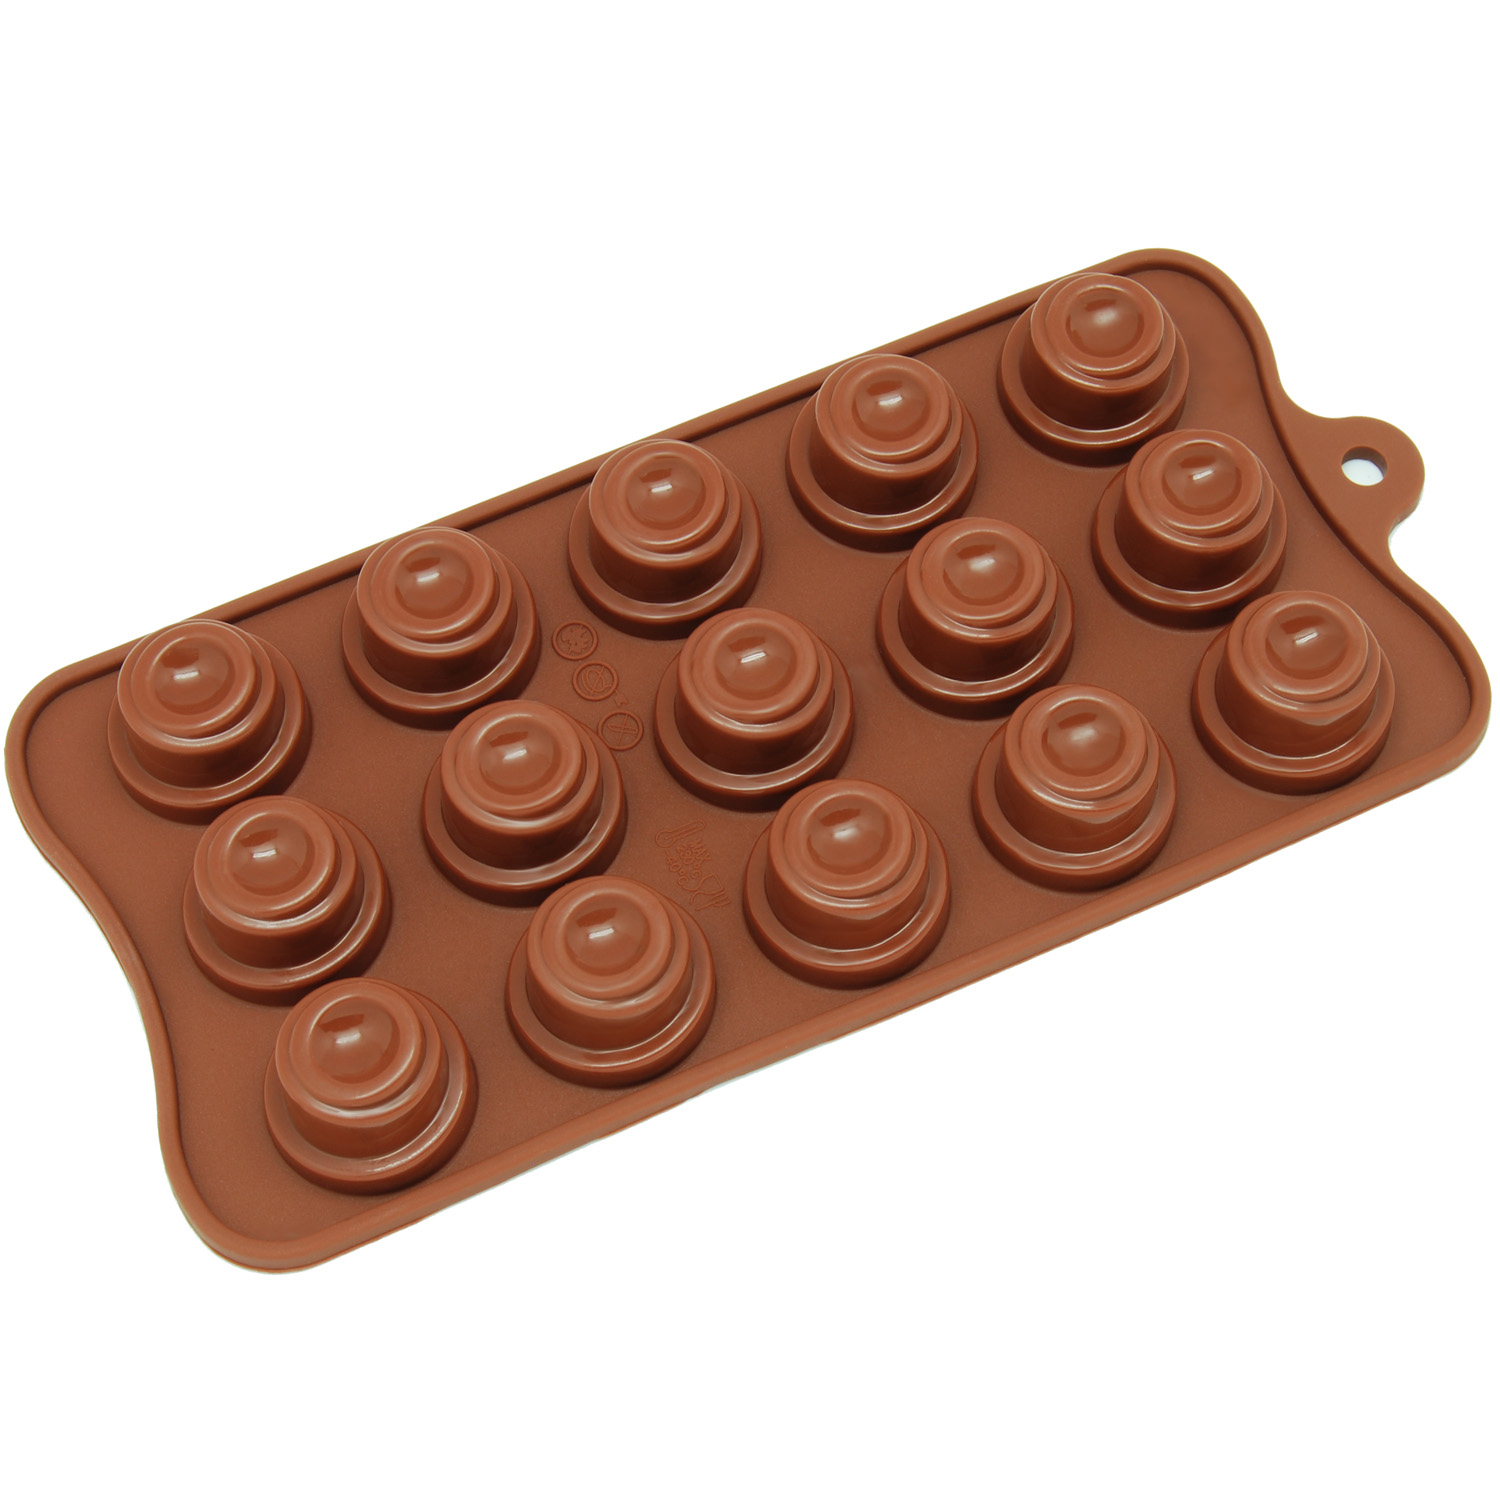 Freshware Silicone Mold, Chocolate Mold, Candy Mold, Ice Mold, Soap Mold for Chocolate, Candy and Gummy, Spiral, 15-Cavity